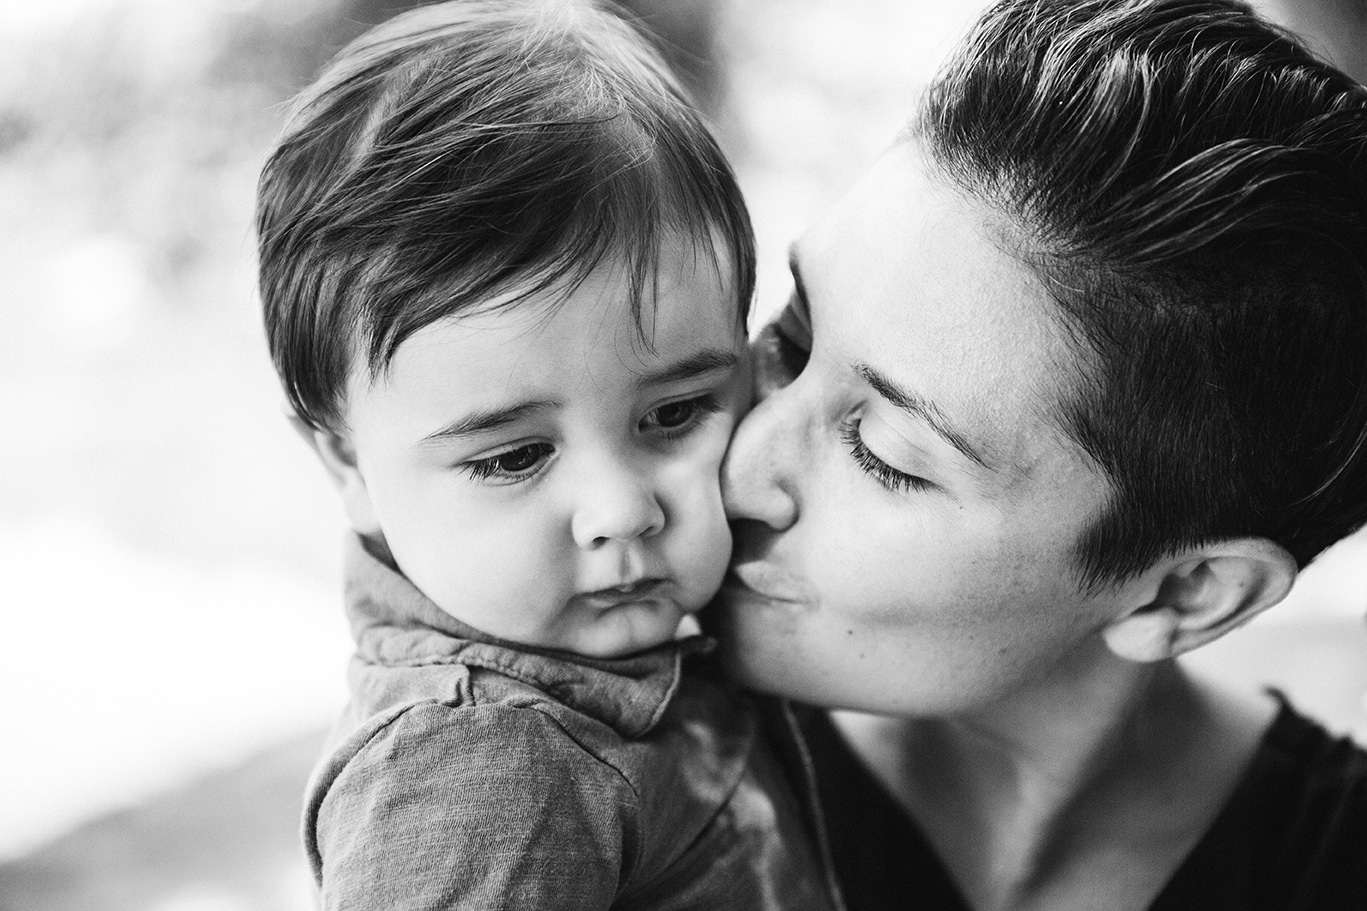 This documentary photograph of a mother kissing her son is one of the best family photographs of 2016